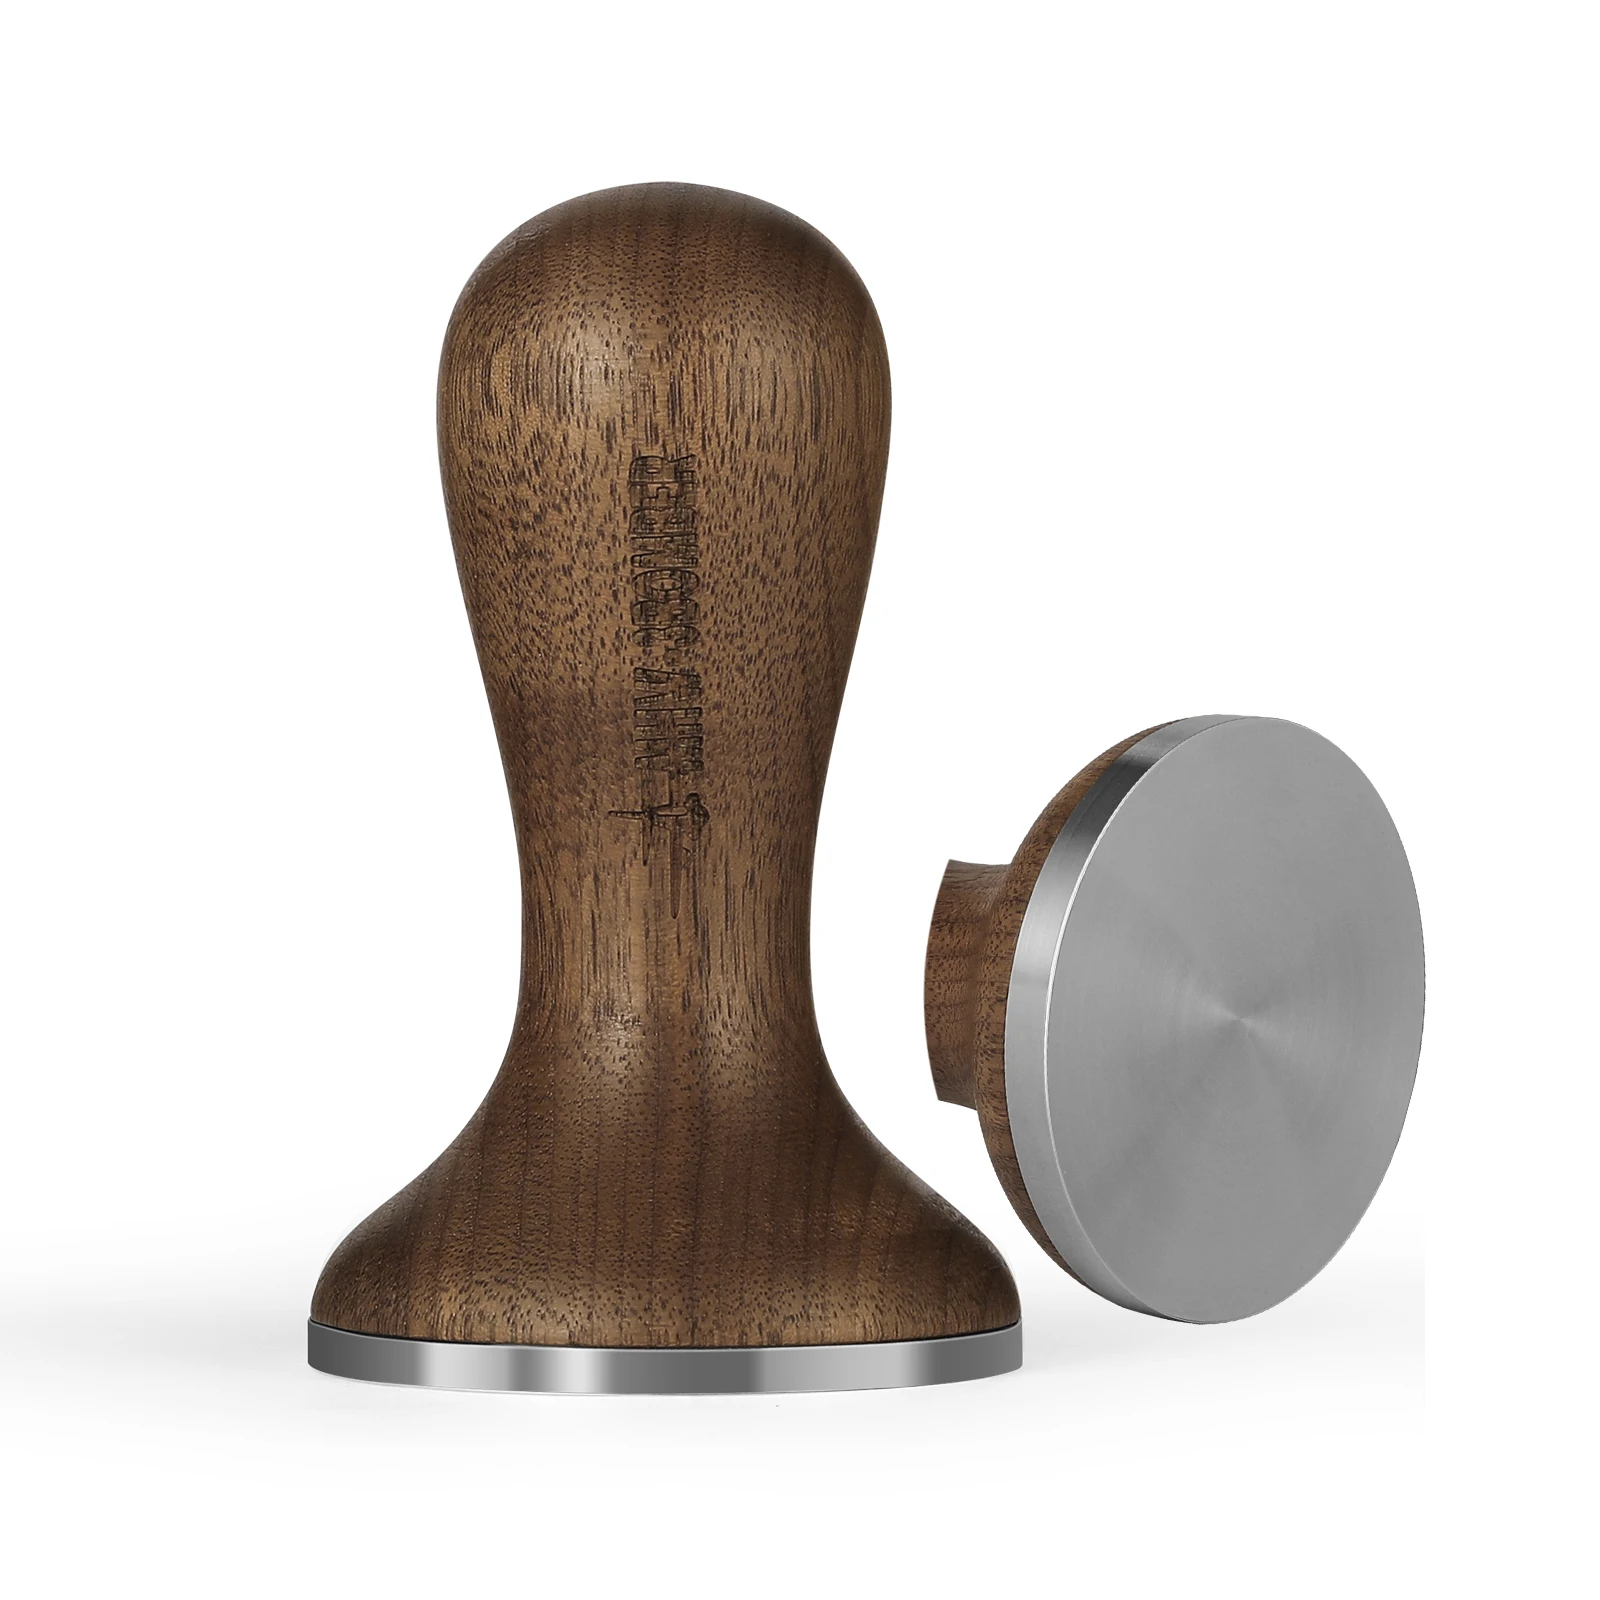 

Coffee Tamper 58.35mm Espresso Press Tampers Stainless Steel Flat & Thread Base Vintage Wood Handle Home Barista Accessories